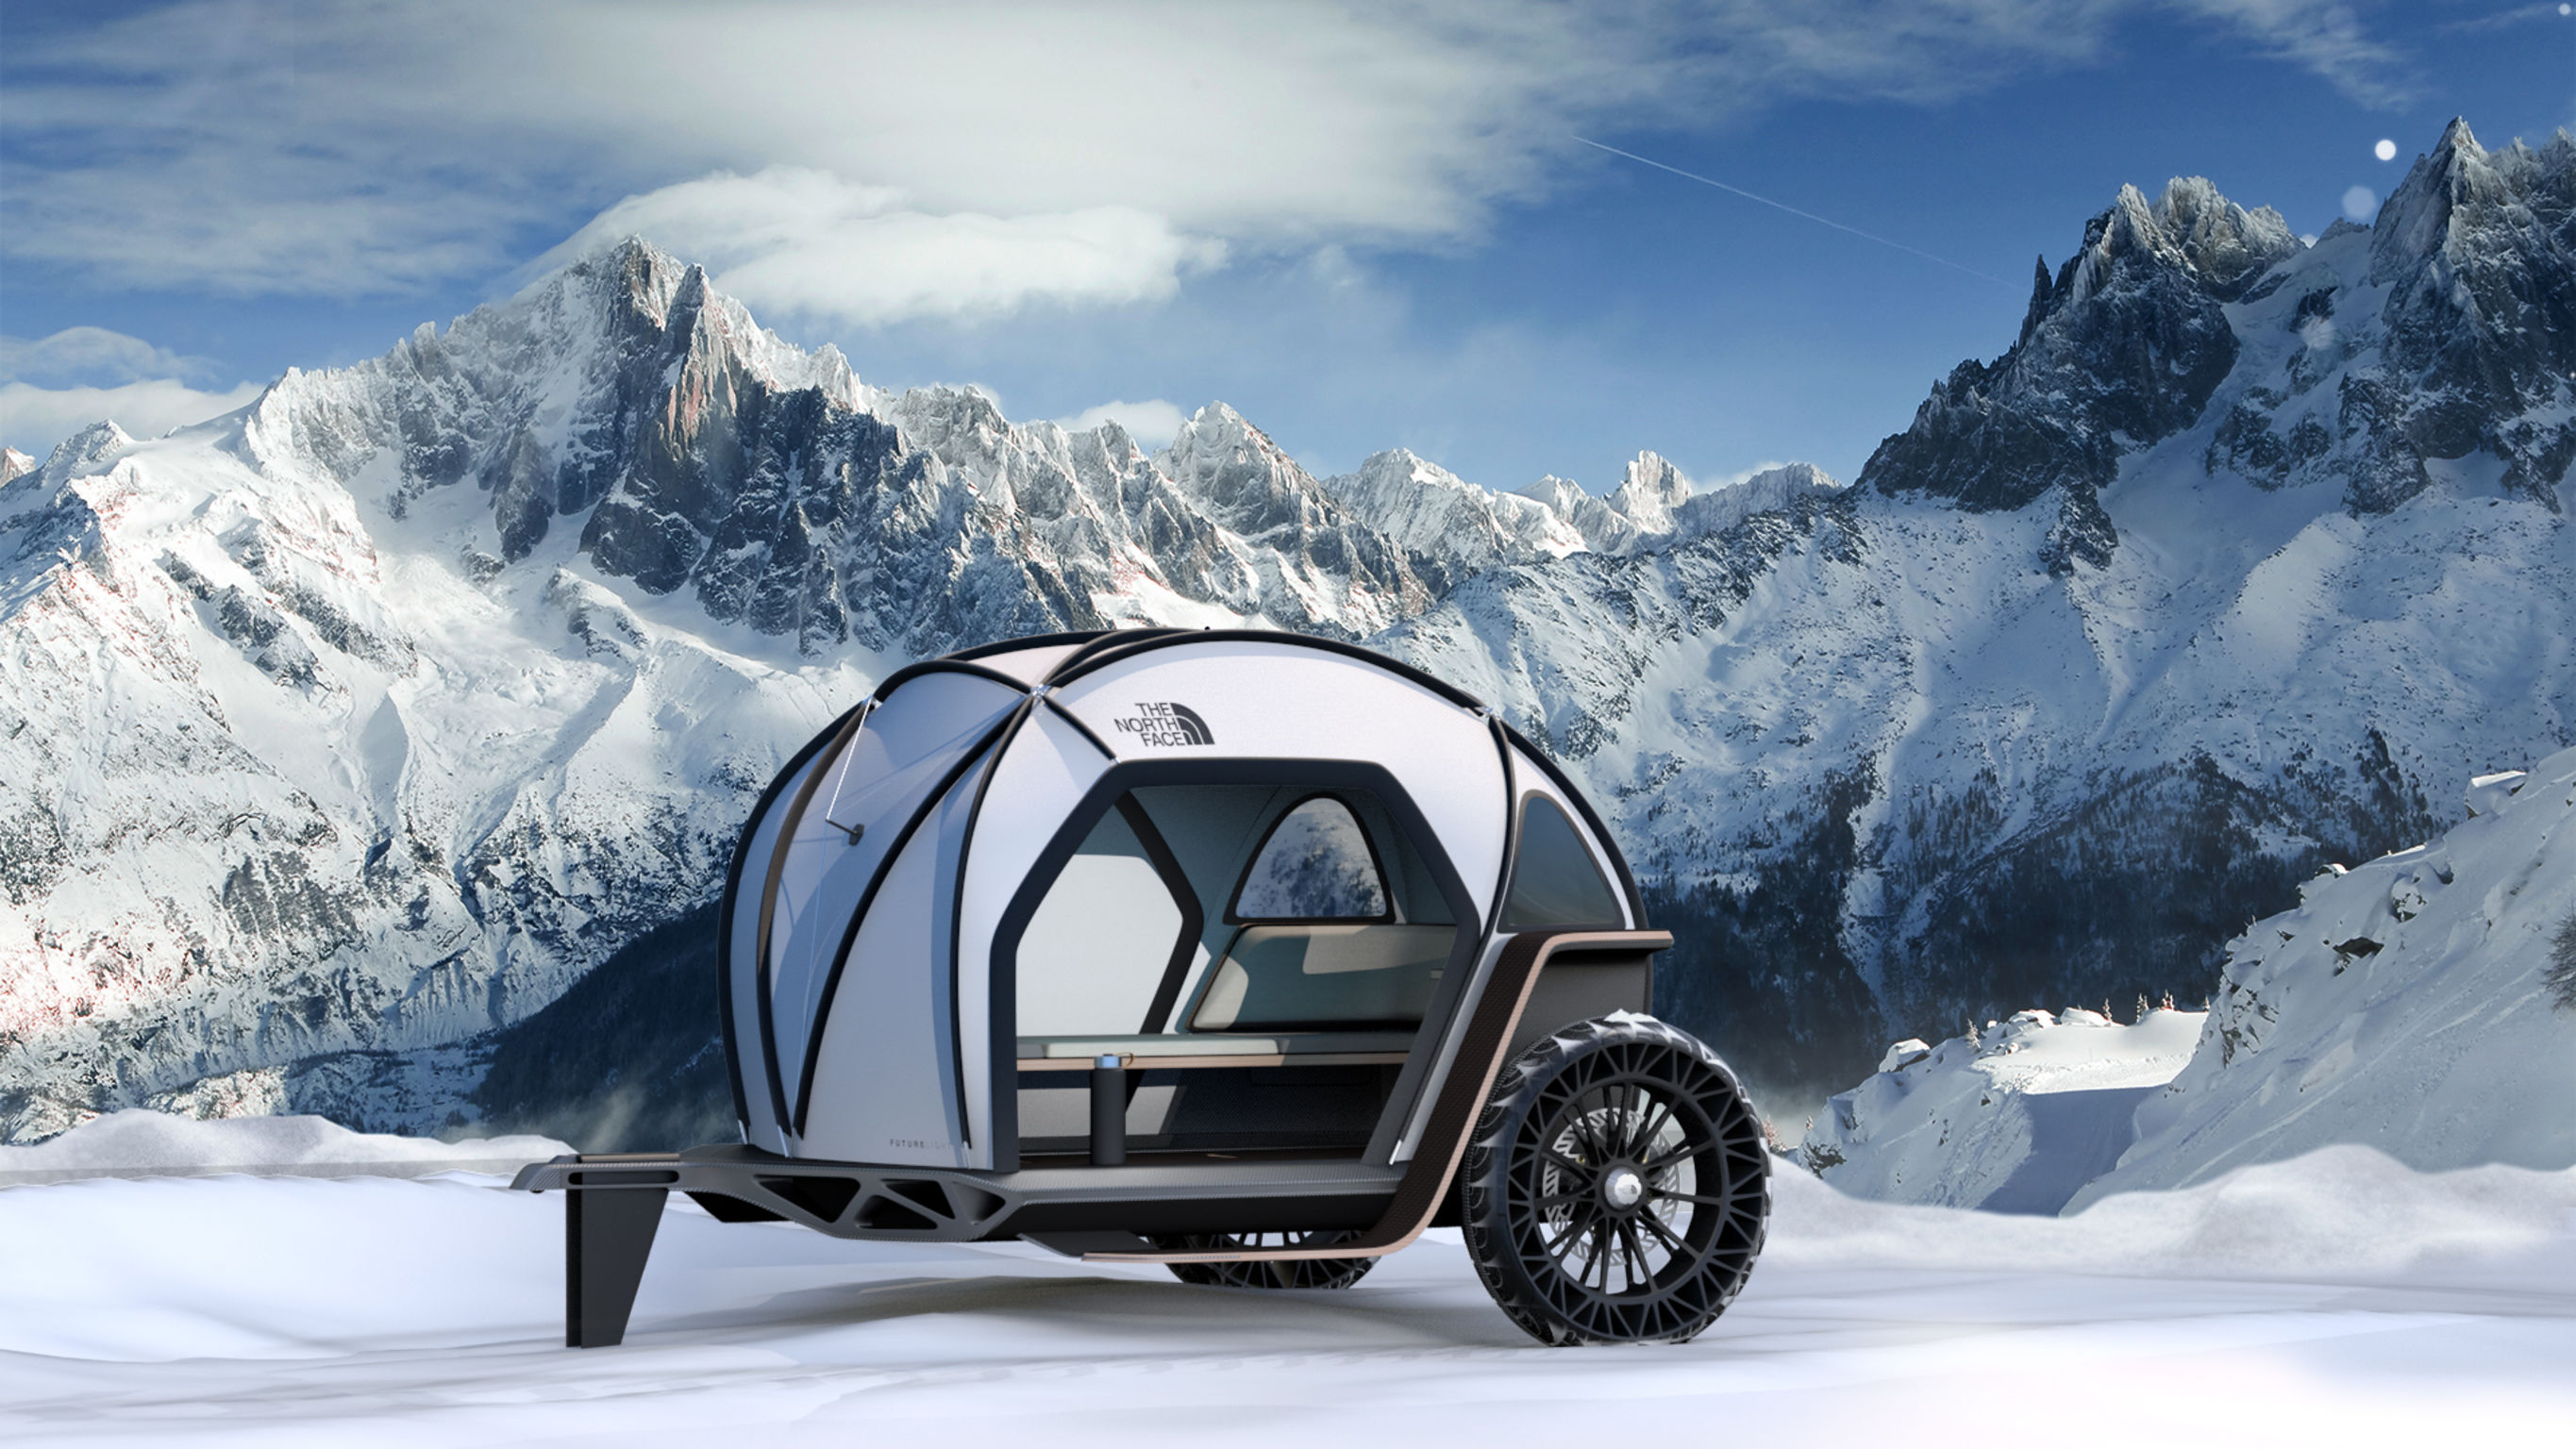 The North Face Concept Camper